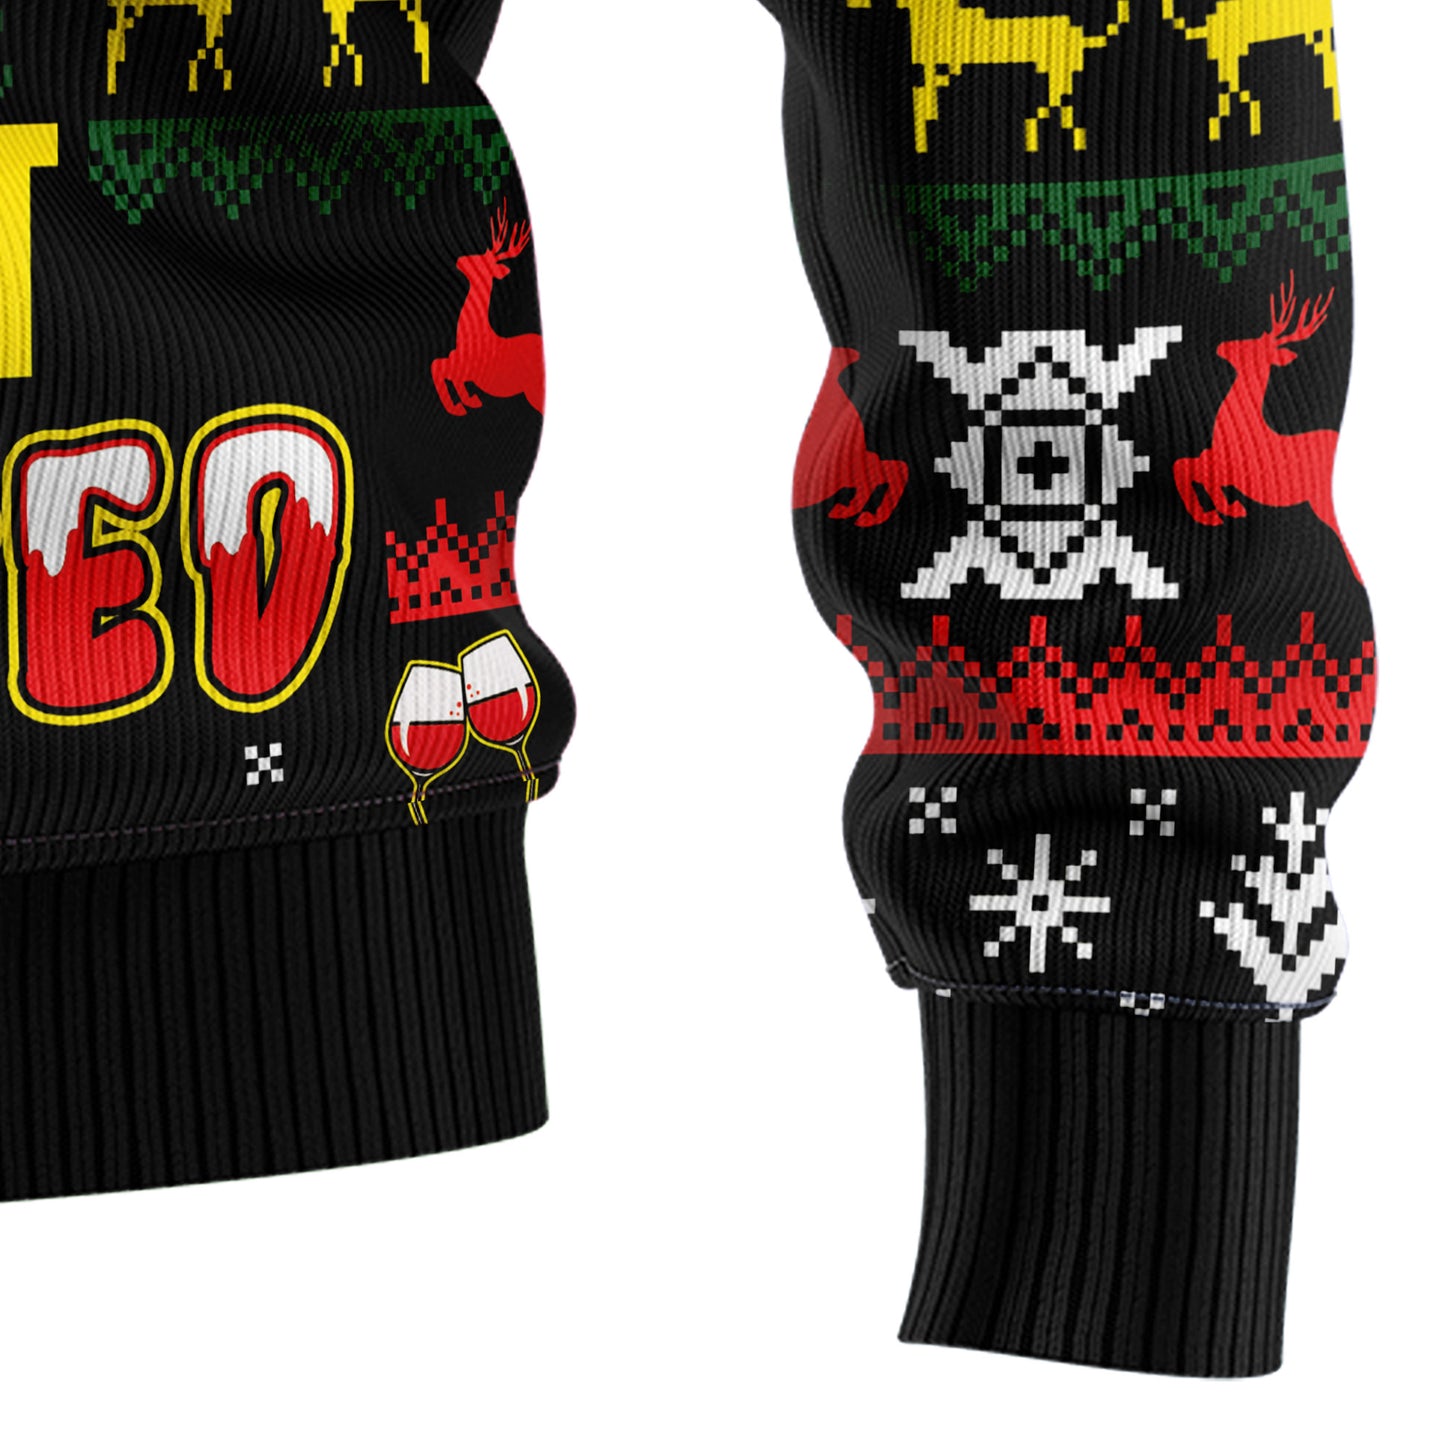 Time To Get Blitzened HT081201 Ugly Christmas Sweater